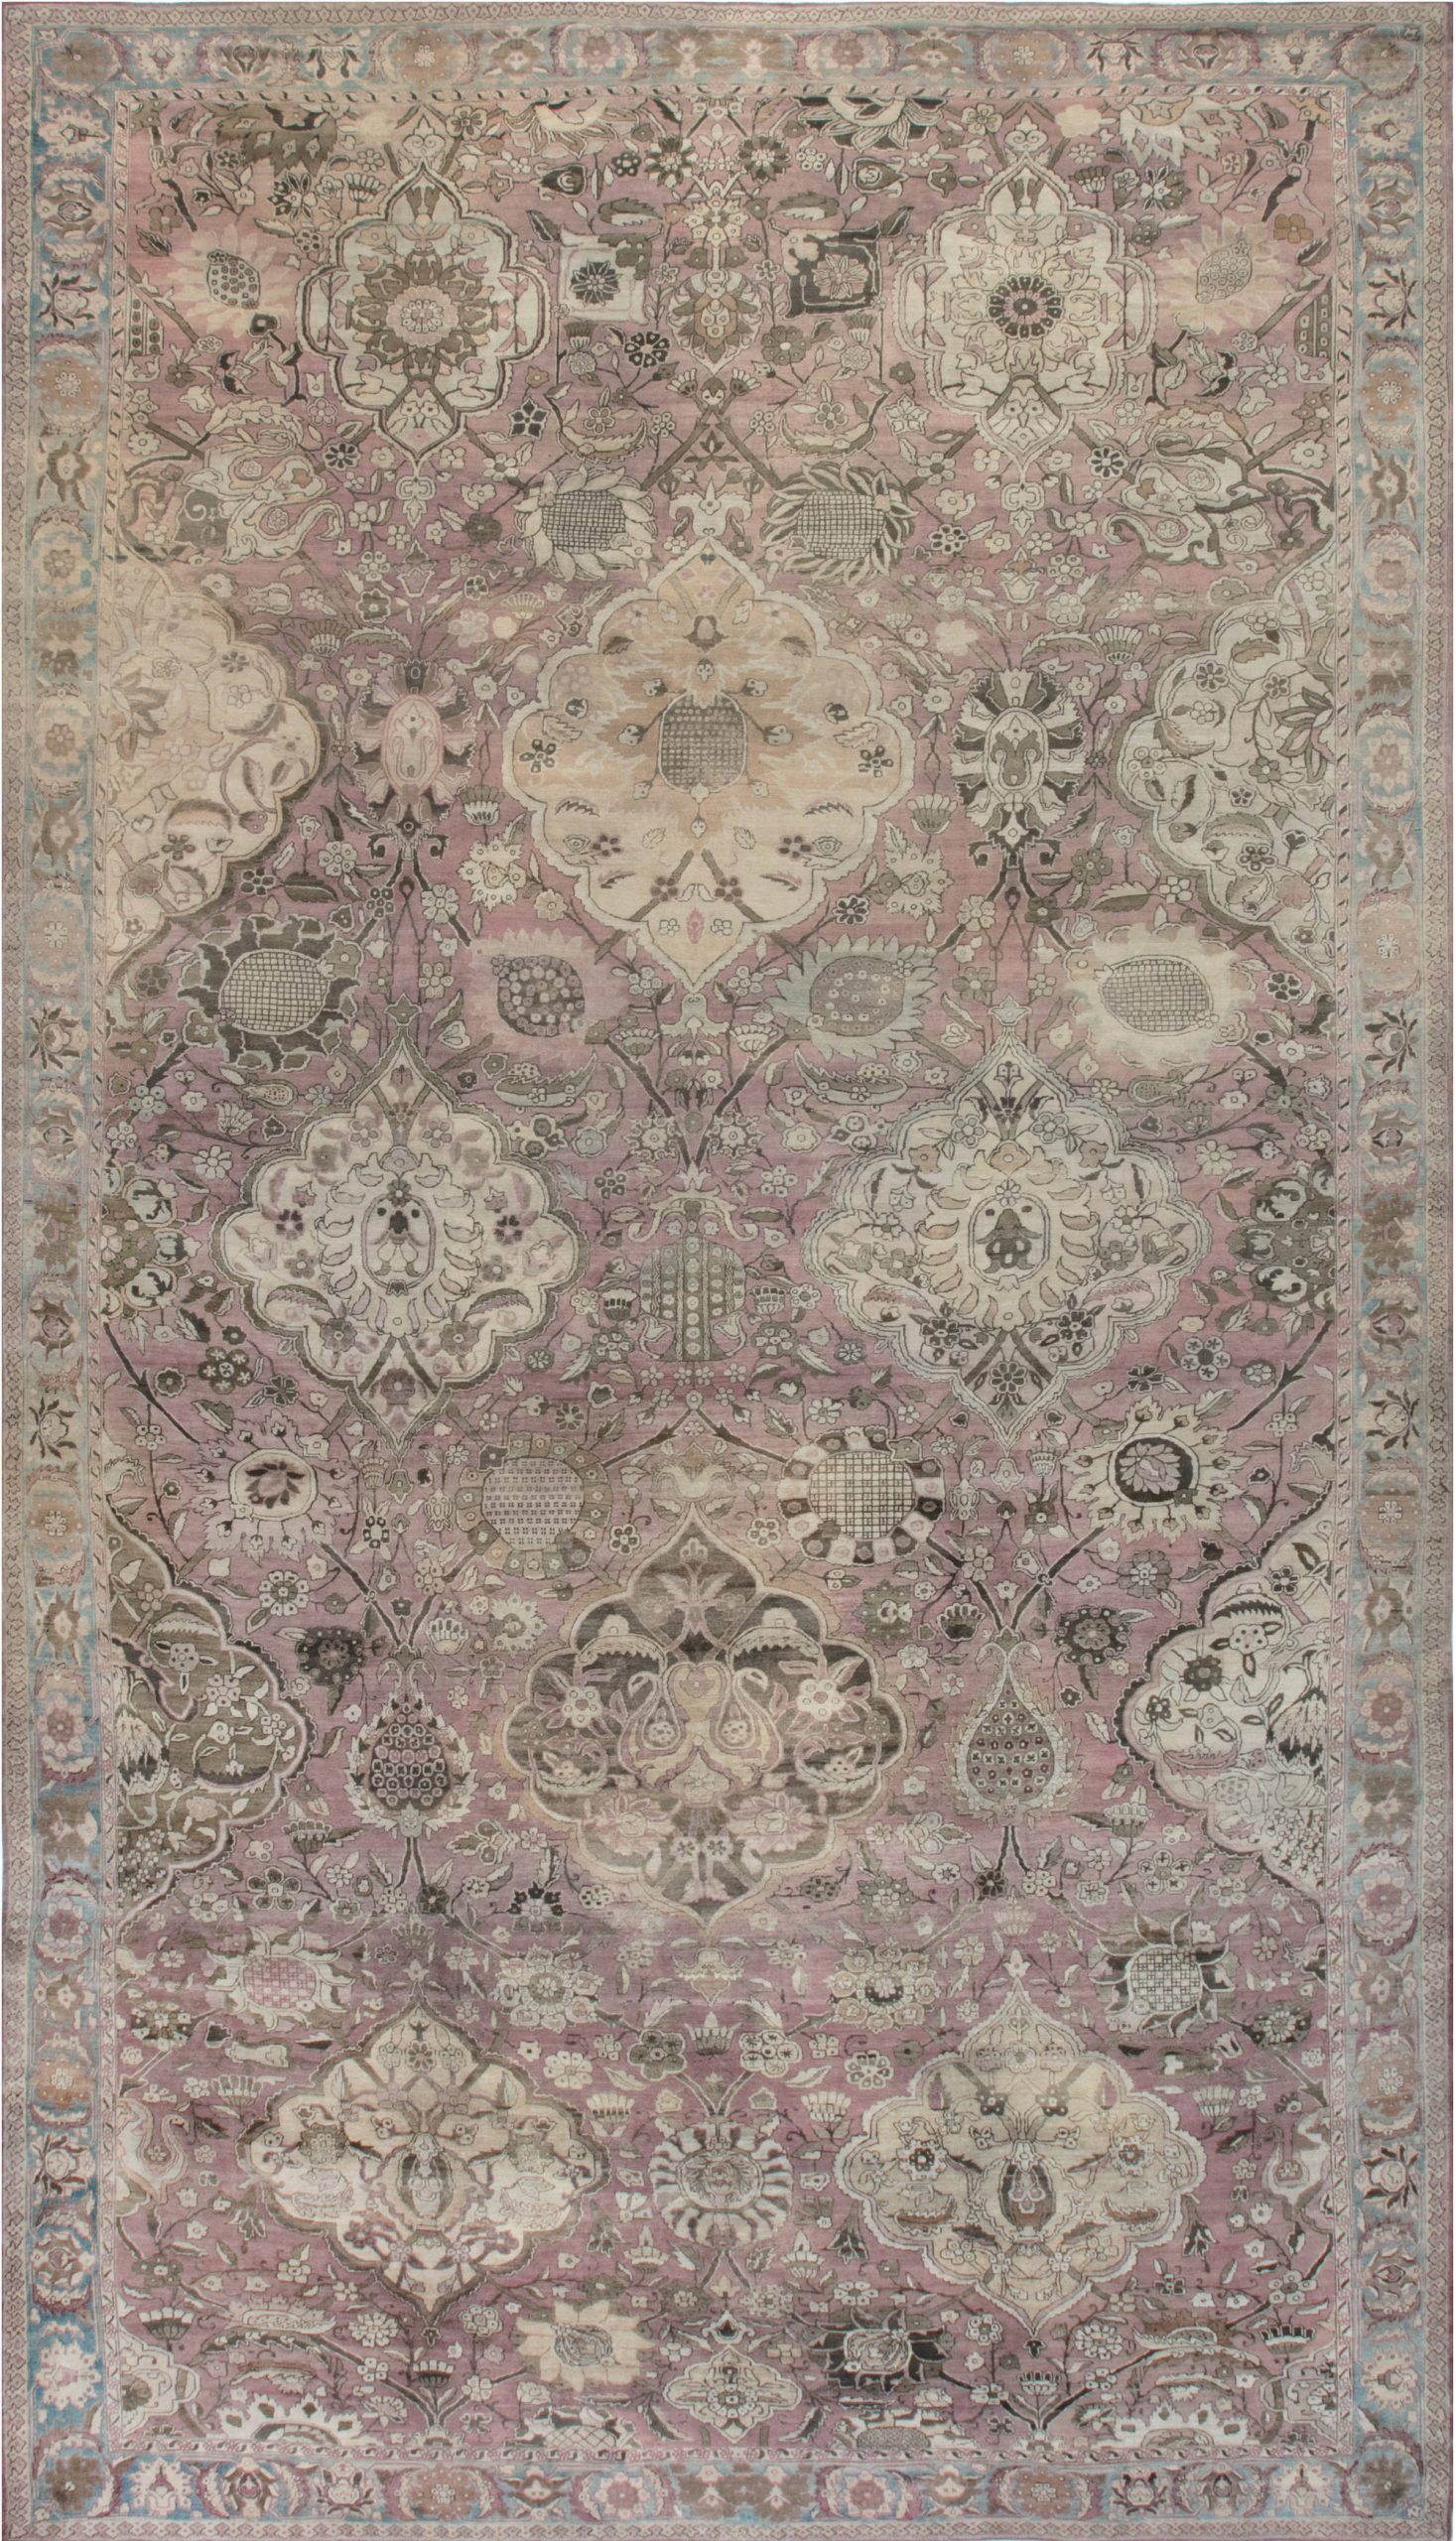 Early 20th Century Kirman Rug in Beige, Blue, Brown and Pink BB6960